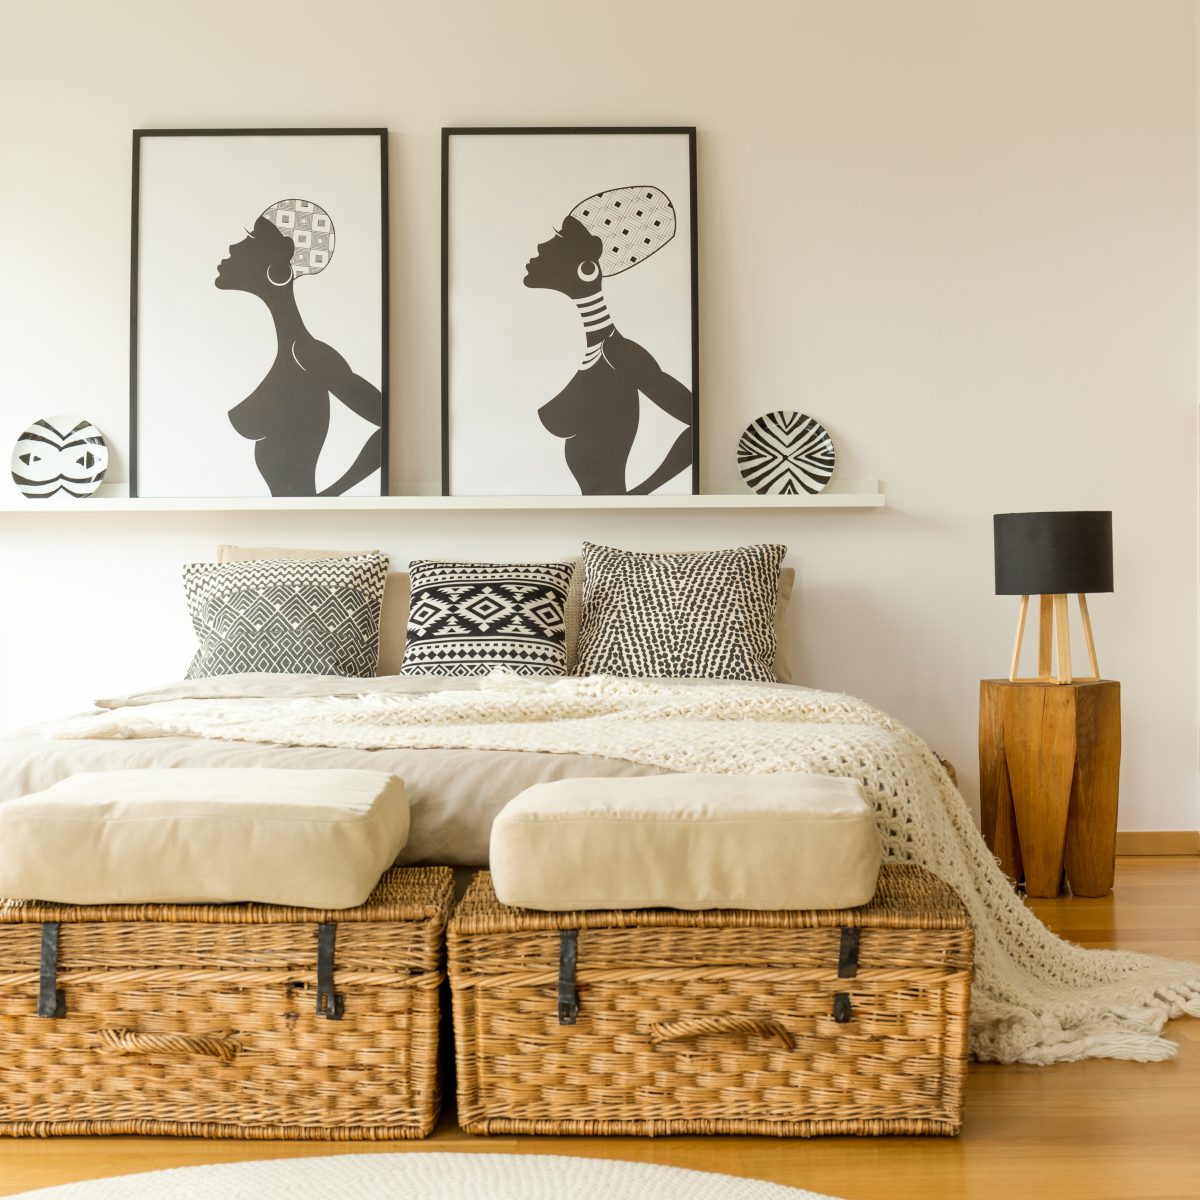 21 totally genius bedroom organizers to maximize storage space